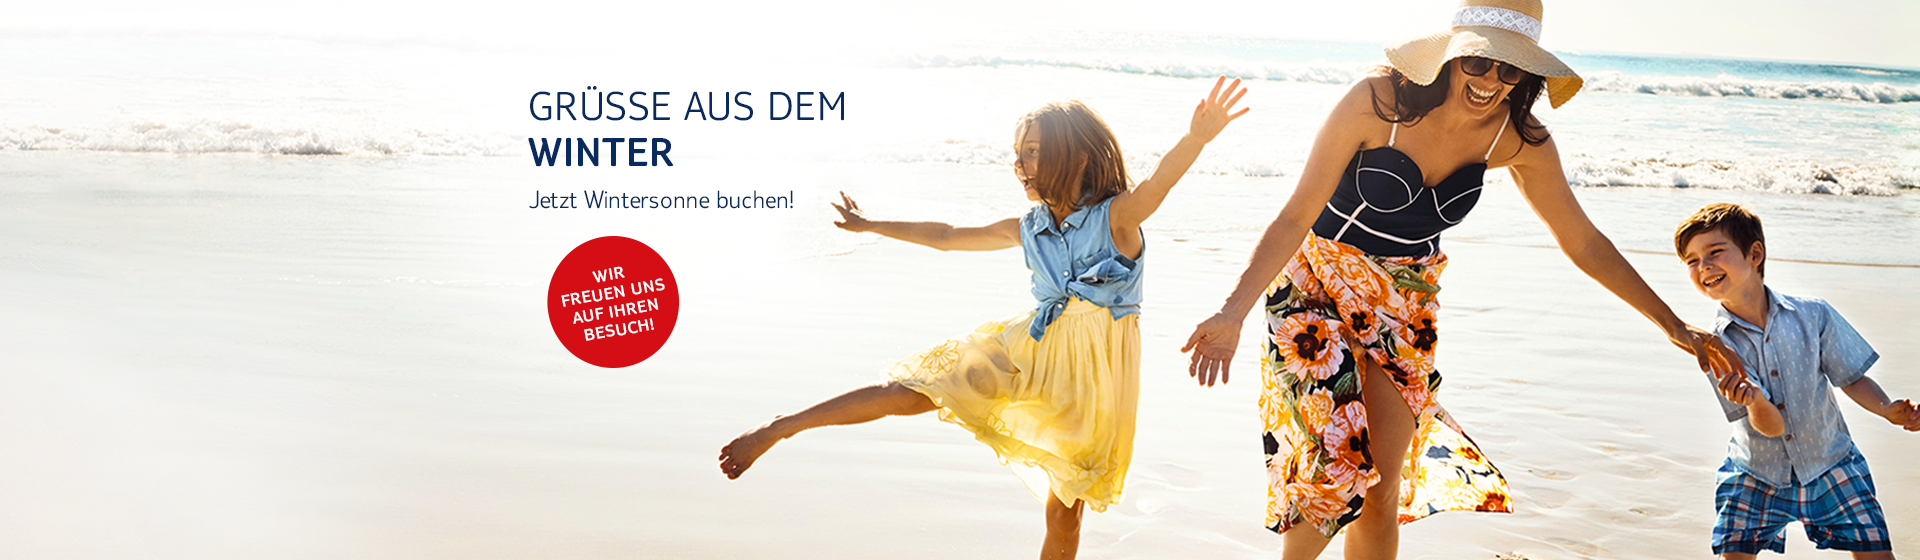 RB_Kampagne_8_2022_Banner_TUI_TRC_Sommer_1920x560px_Step01